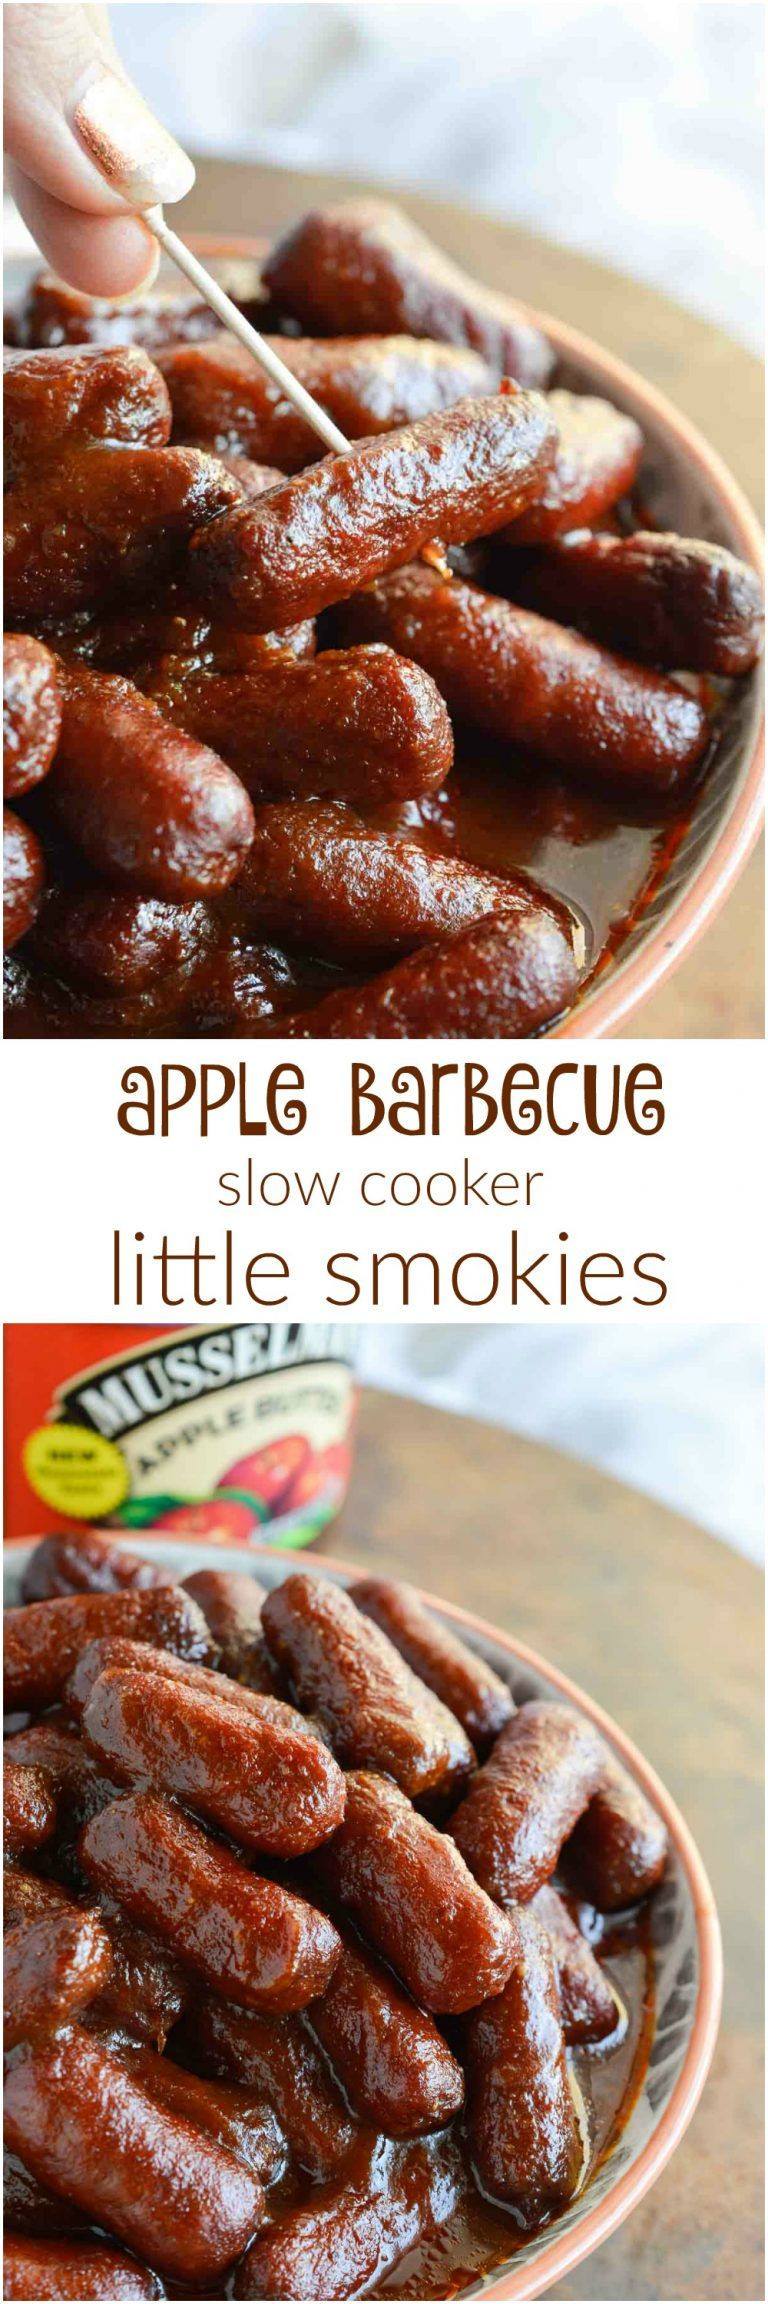 Slow Cooker Holiday Appetizers
 Apple Barbecue Slow Cooker Little Smokies are the perfect